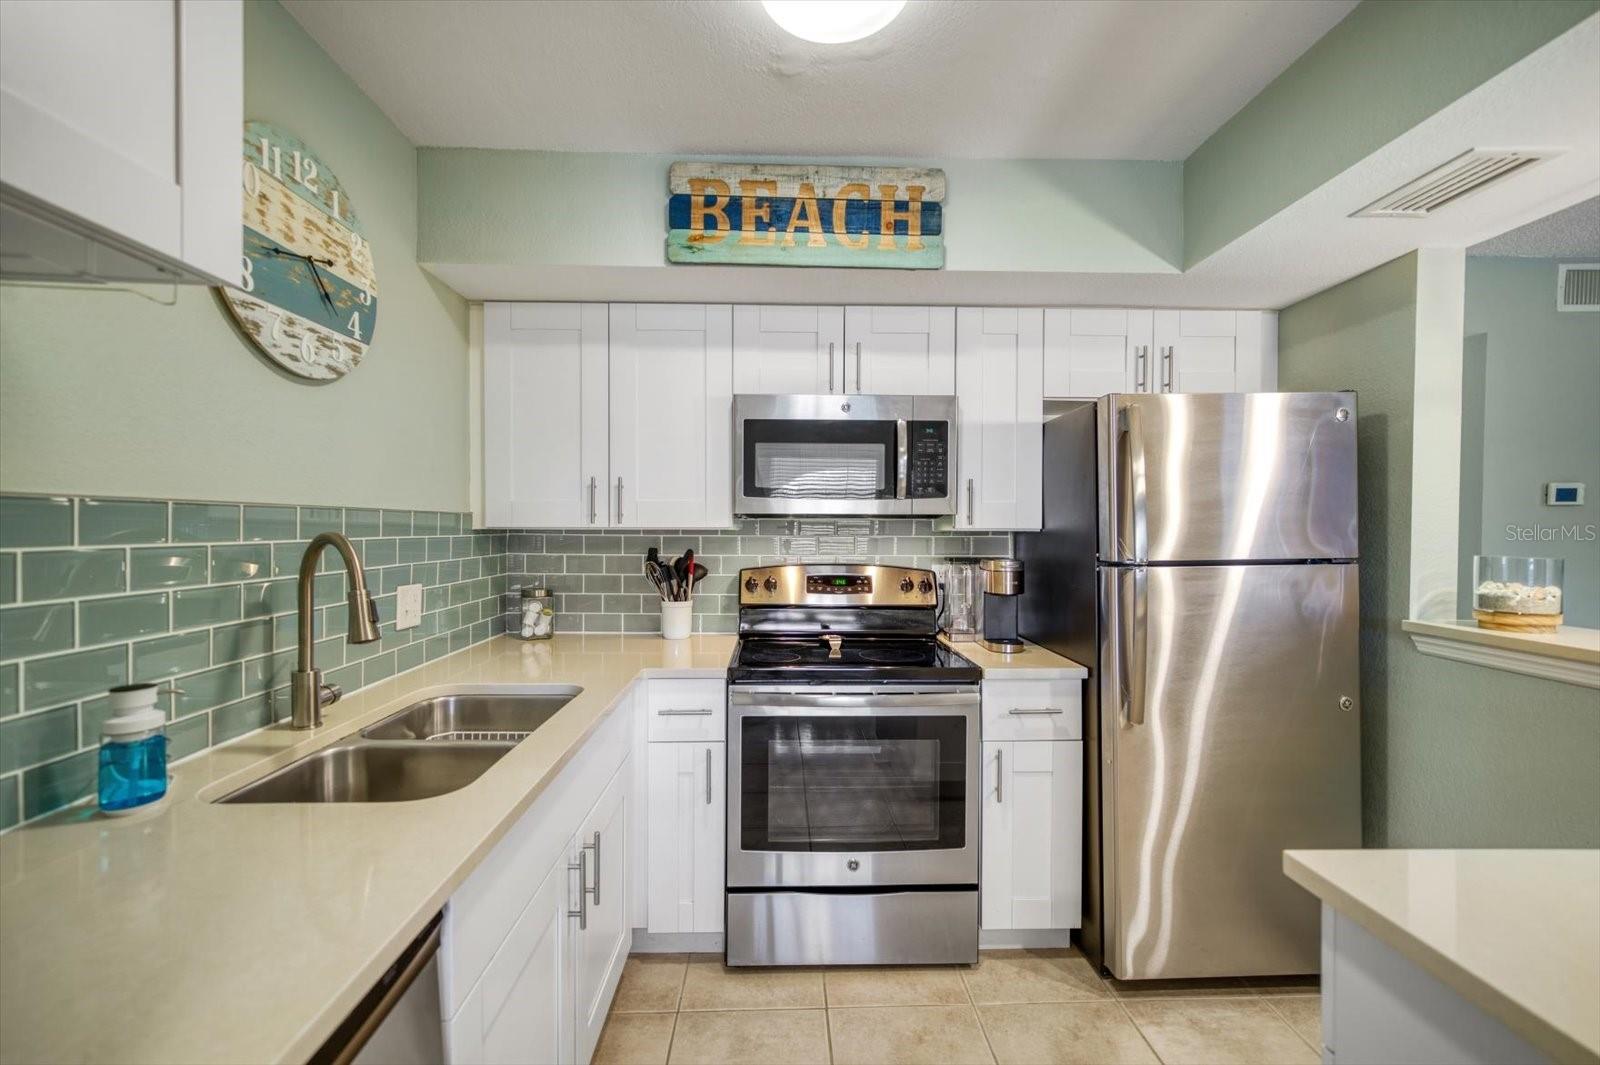 Newer Stainless steel appliances and elegant tile backsplash. Fully stocked with kitchenware and ready to rent!